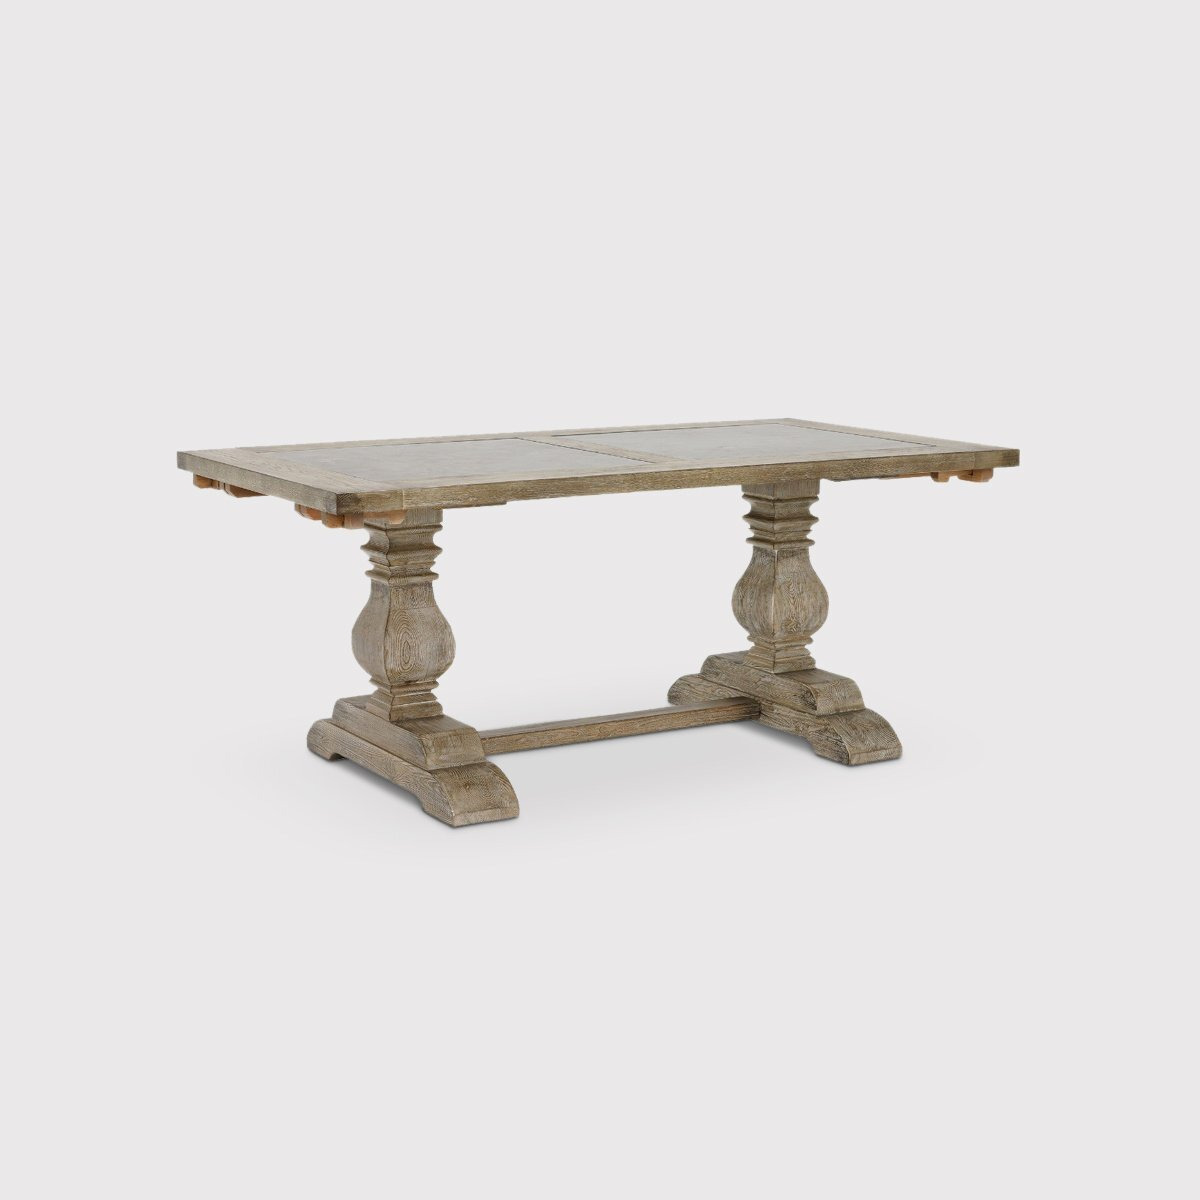 Woolton Extending Dining Table 220x100cm, Oak Wood - Barker & Stonehouse - image 1